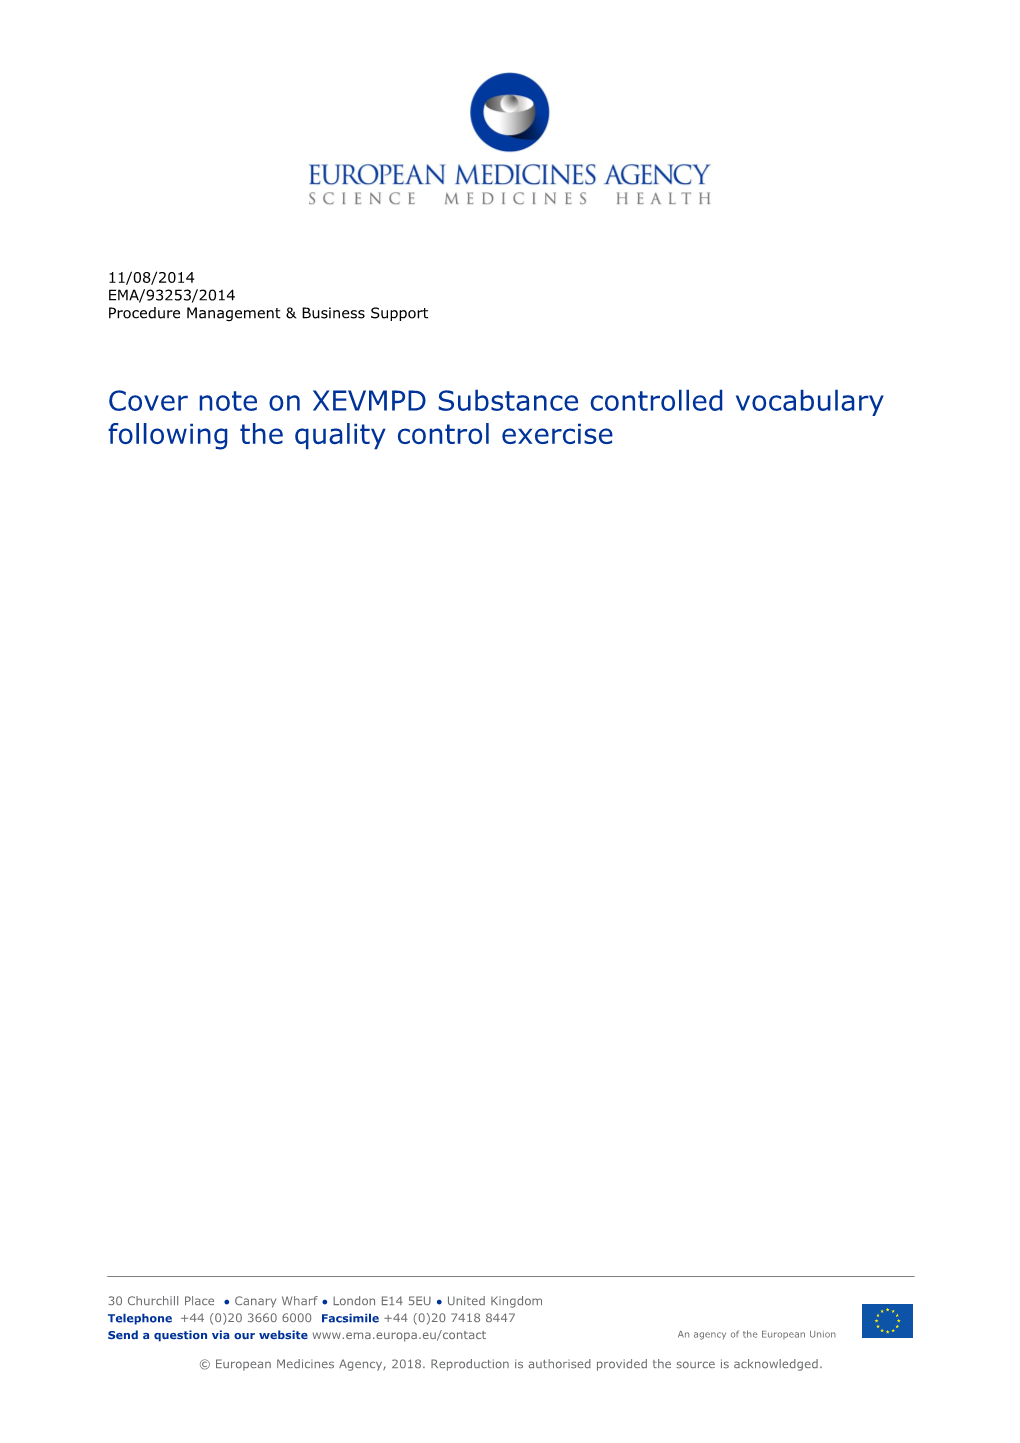 Cover Note on XEVMPD Substance Controlled Vocabulary Following the Quality Control Exercise